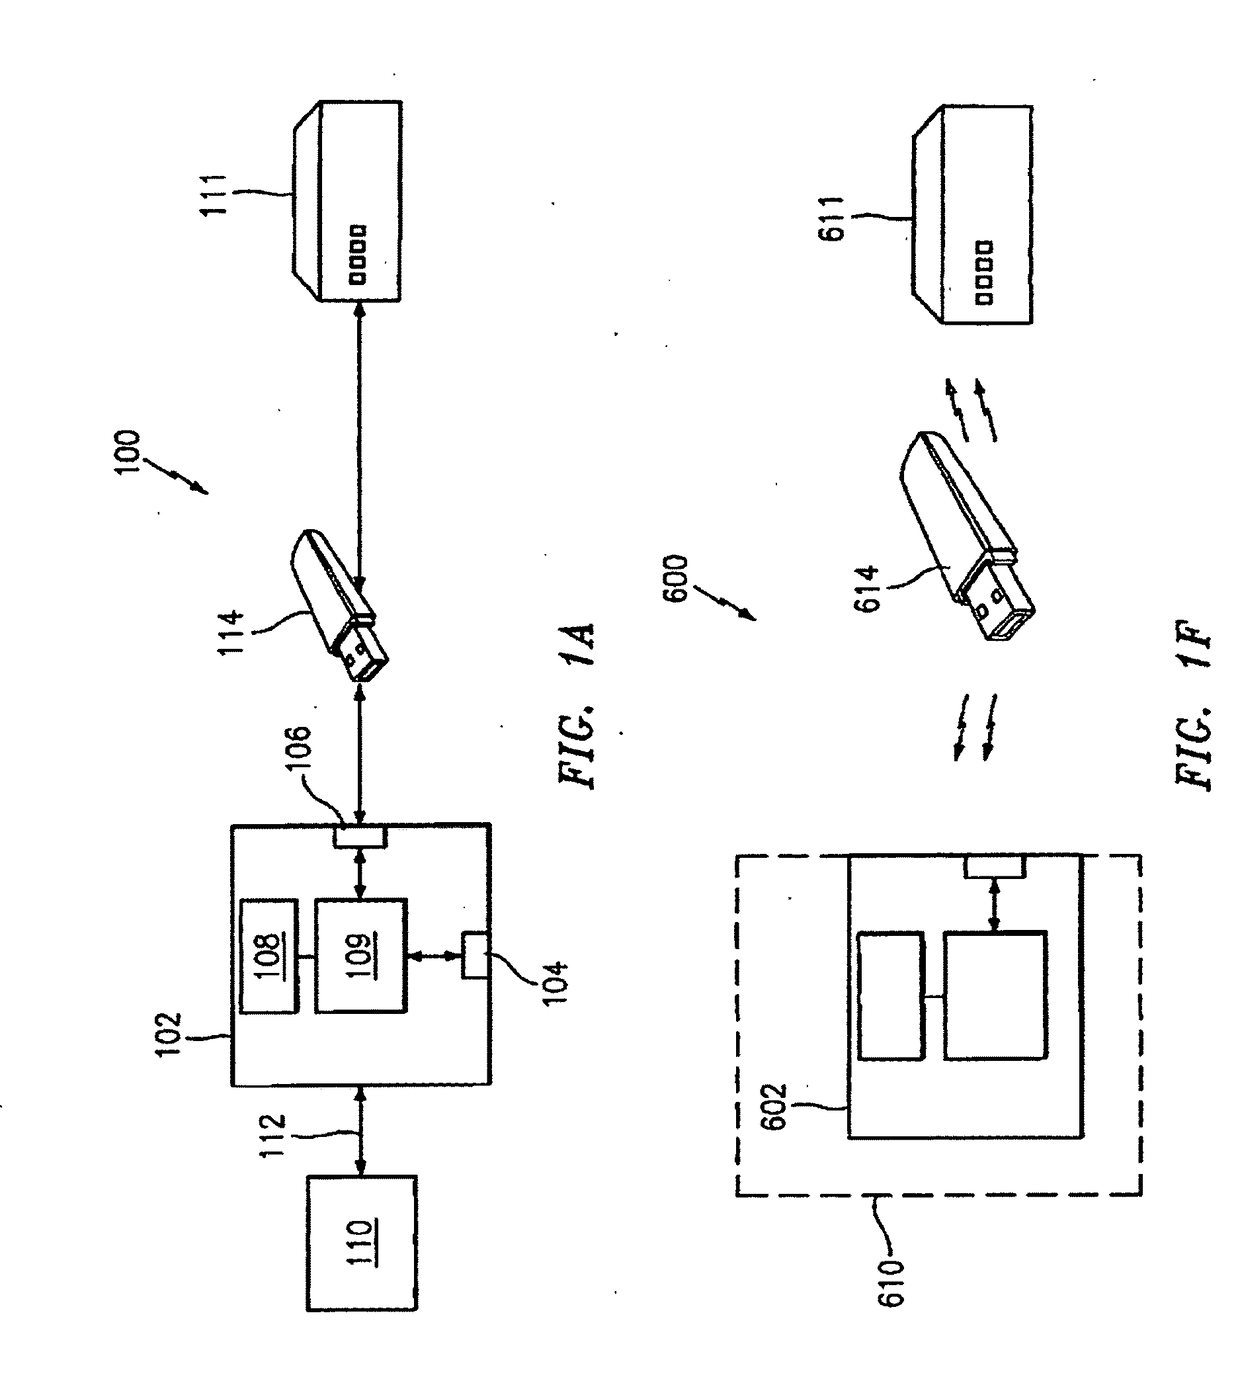 Data communications between an exercise device and a personal content device